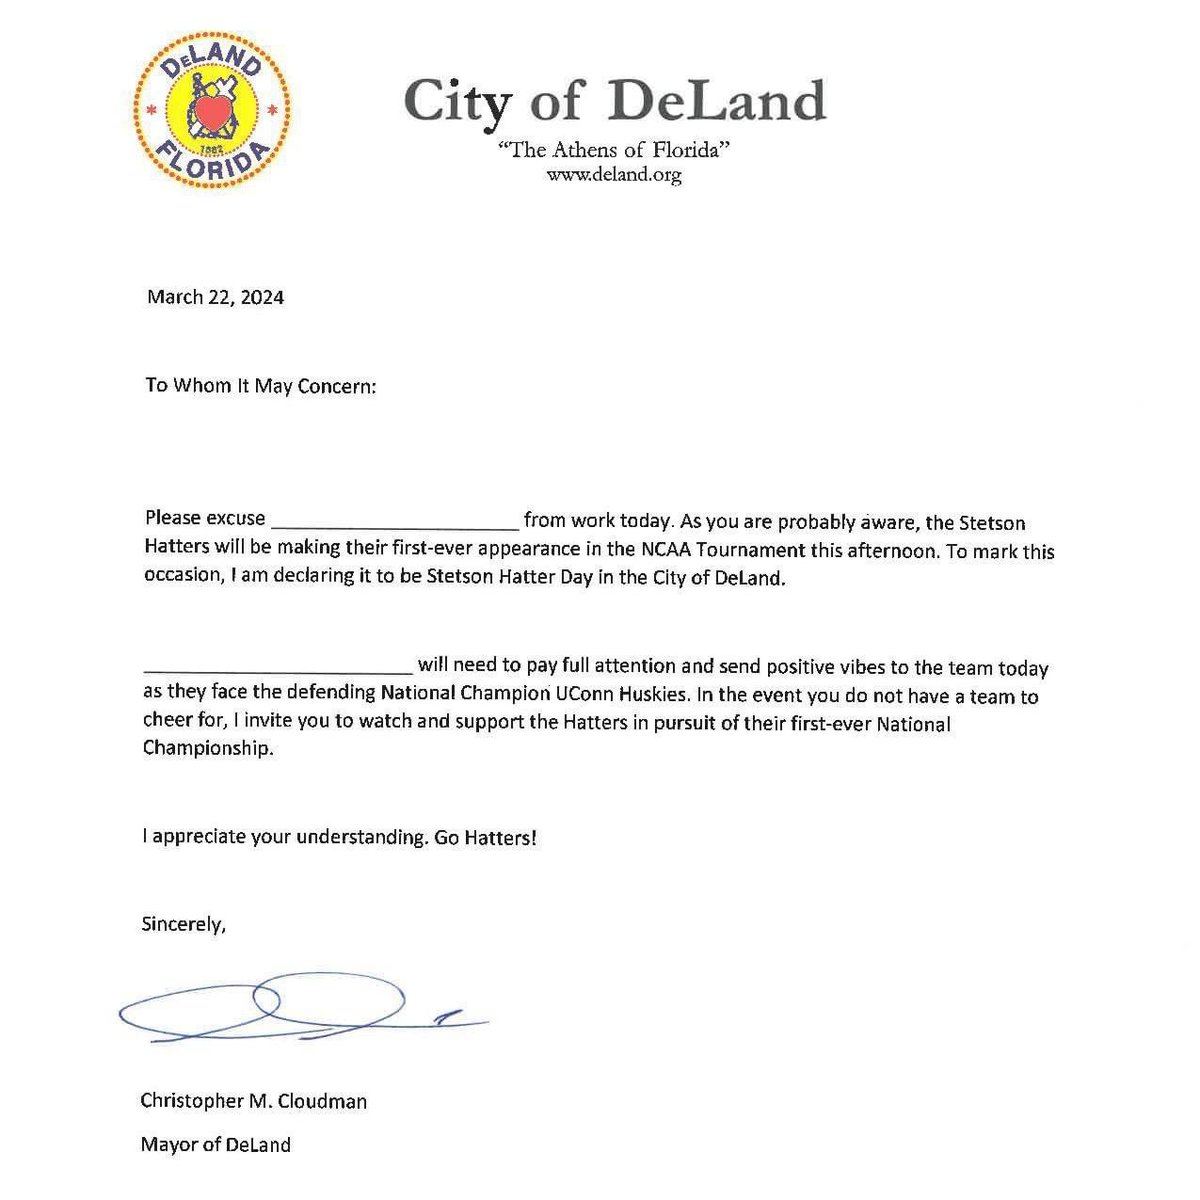 All of DeLand should be watching @MarchMadnessMBB @StetsonMBB this afternoon, no excuses! Here’s your get out of work excuse letter from Mayor Chris Cloudman! #GoHatters 🤠 | #AllHats | #MarchMadness